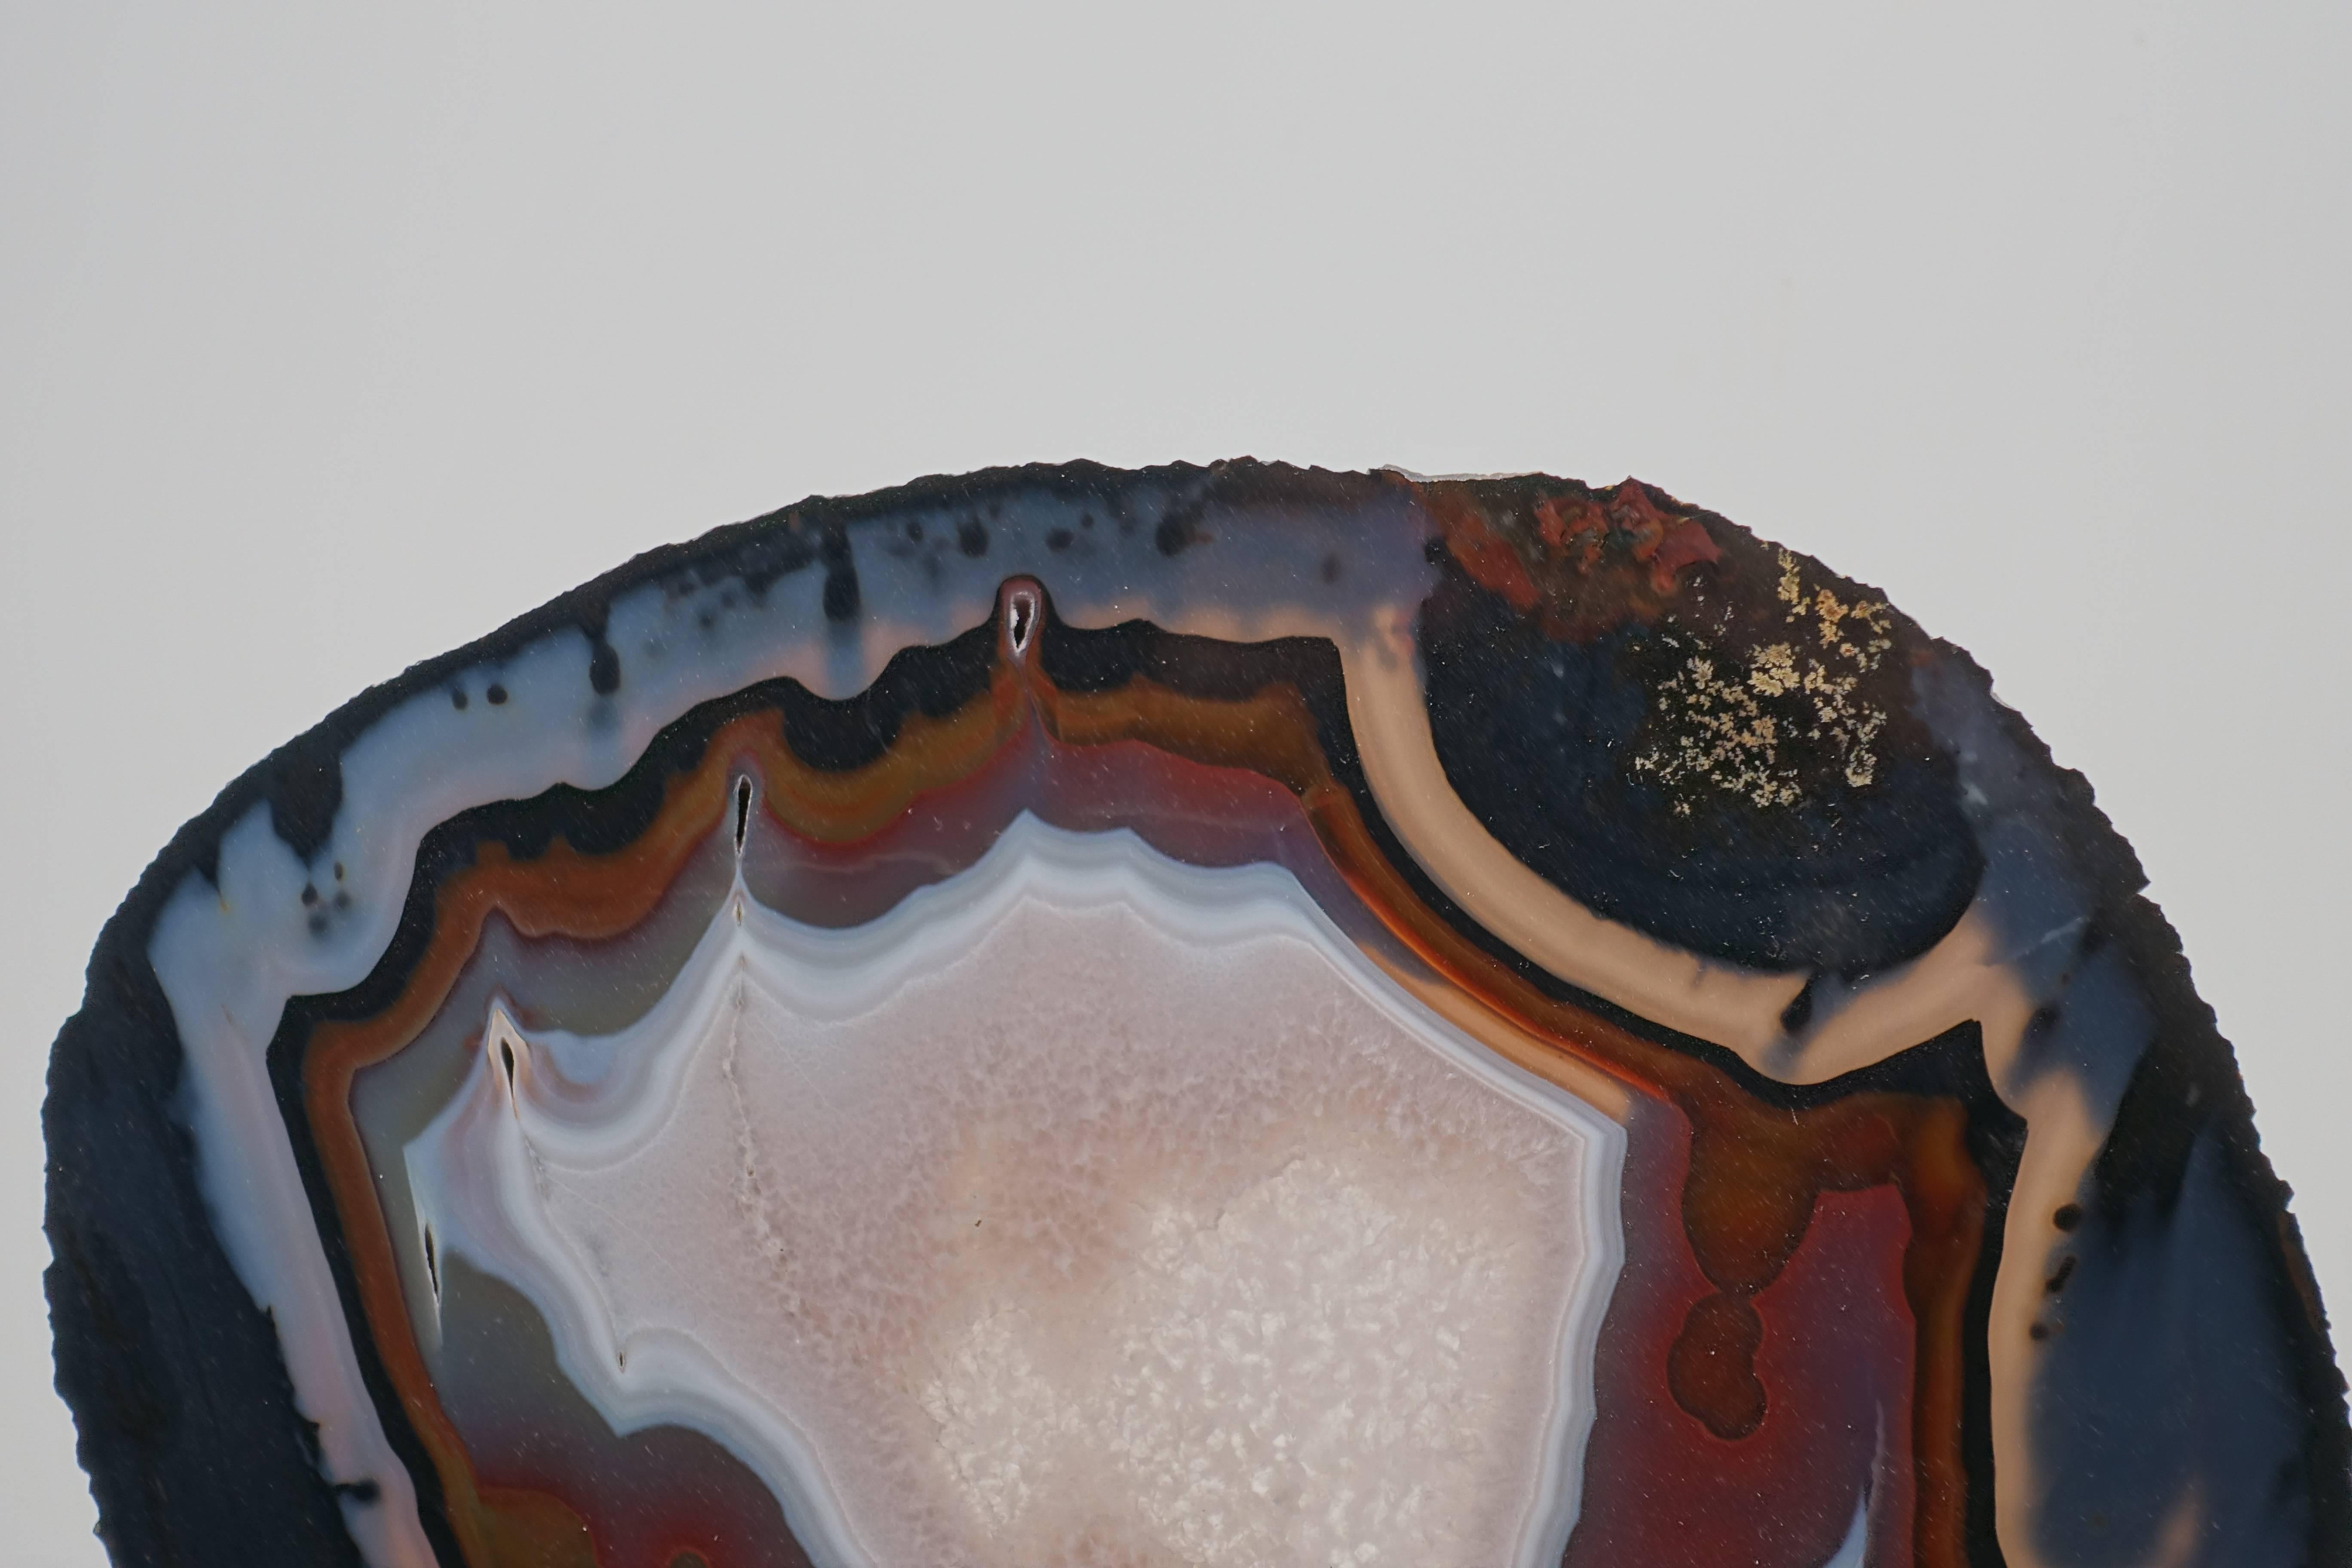 Shades of banded grey, rust, brown, black and crystalline white make this beautiful agate slice on a custom mount a stunning piece for your home or office.

Agate has long believed to promote protection, strength and harmony.